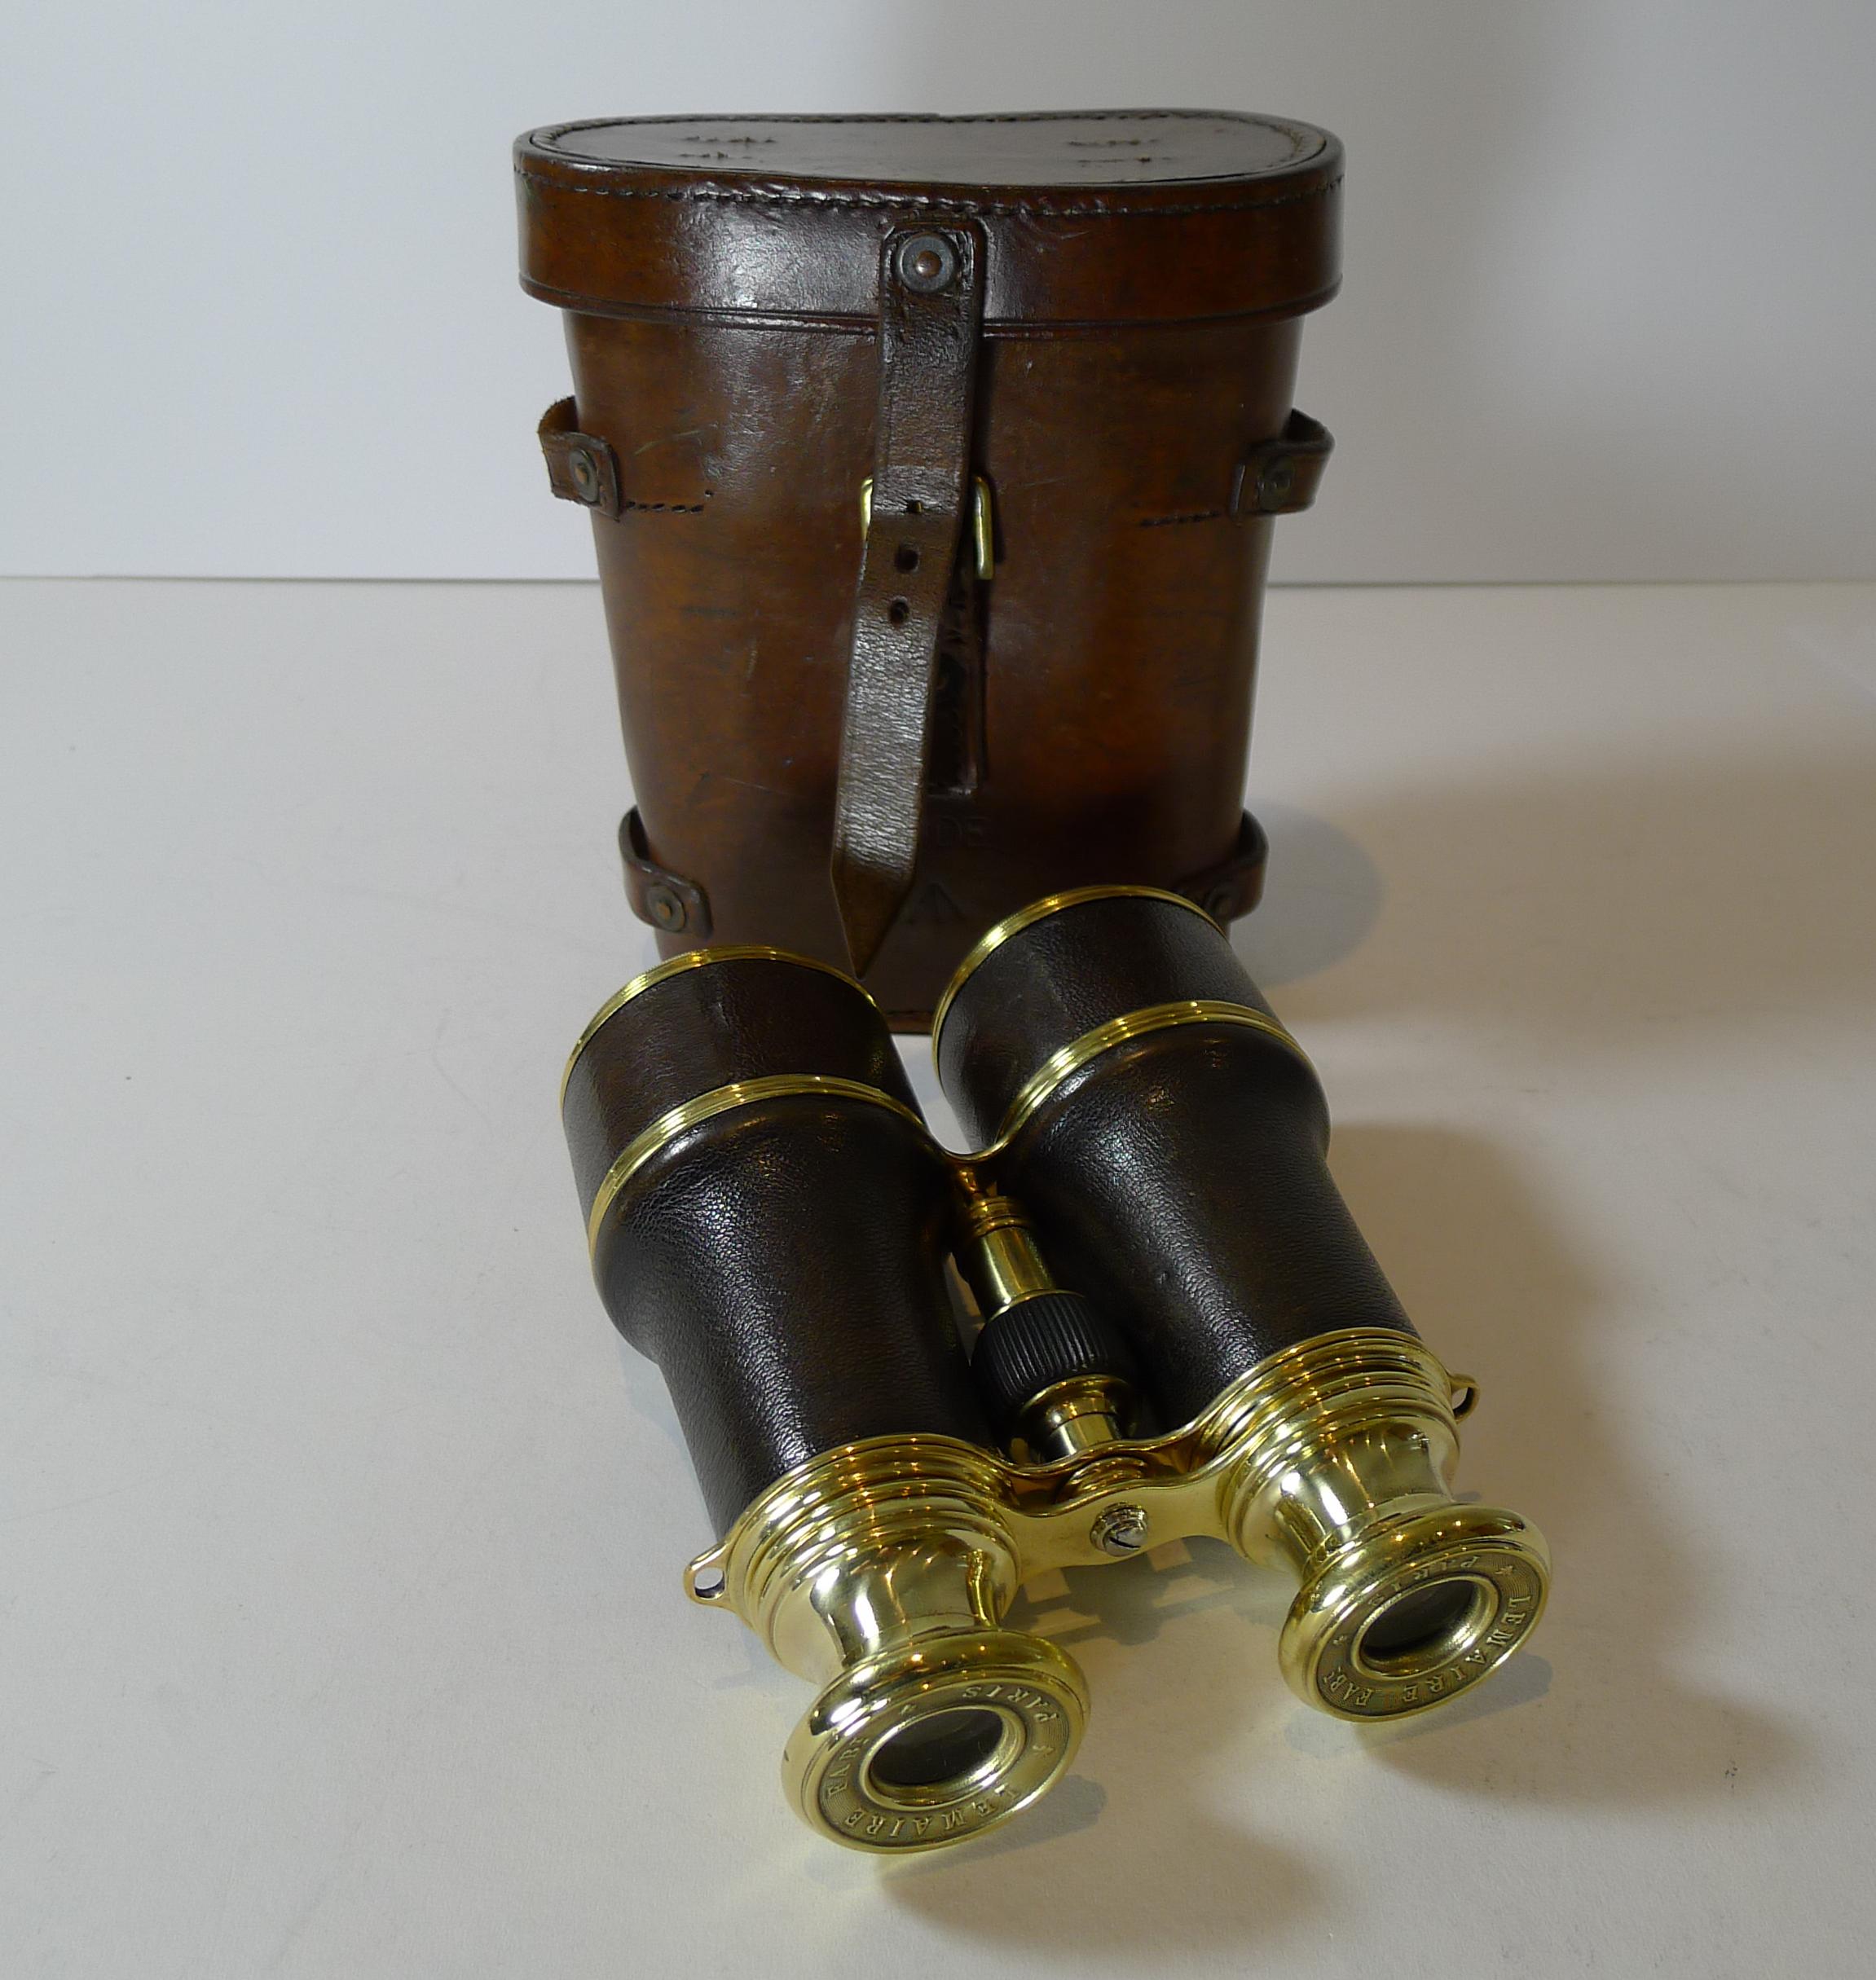 A fabulous pair of French made World War 1 British Officers Military binoculars with both the brass on the binoculars and the leather case with the British military crows foot mark. They were manufactured by the creme de la creme of makers and